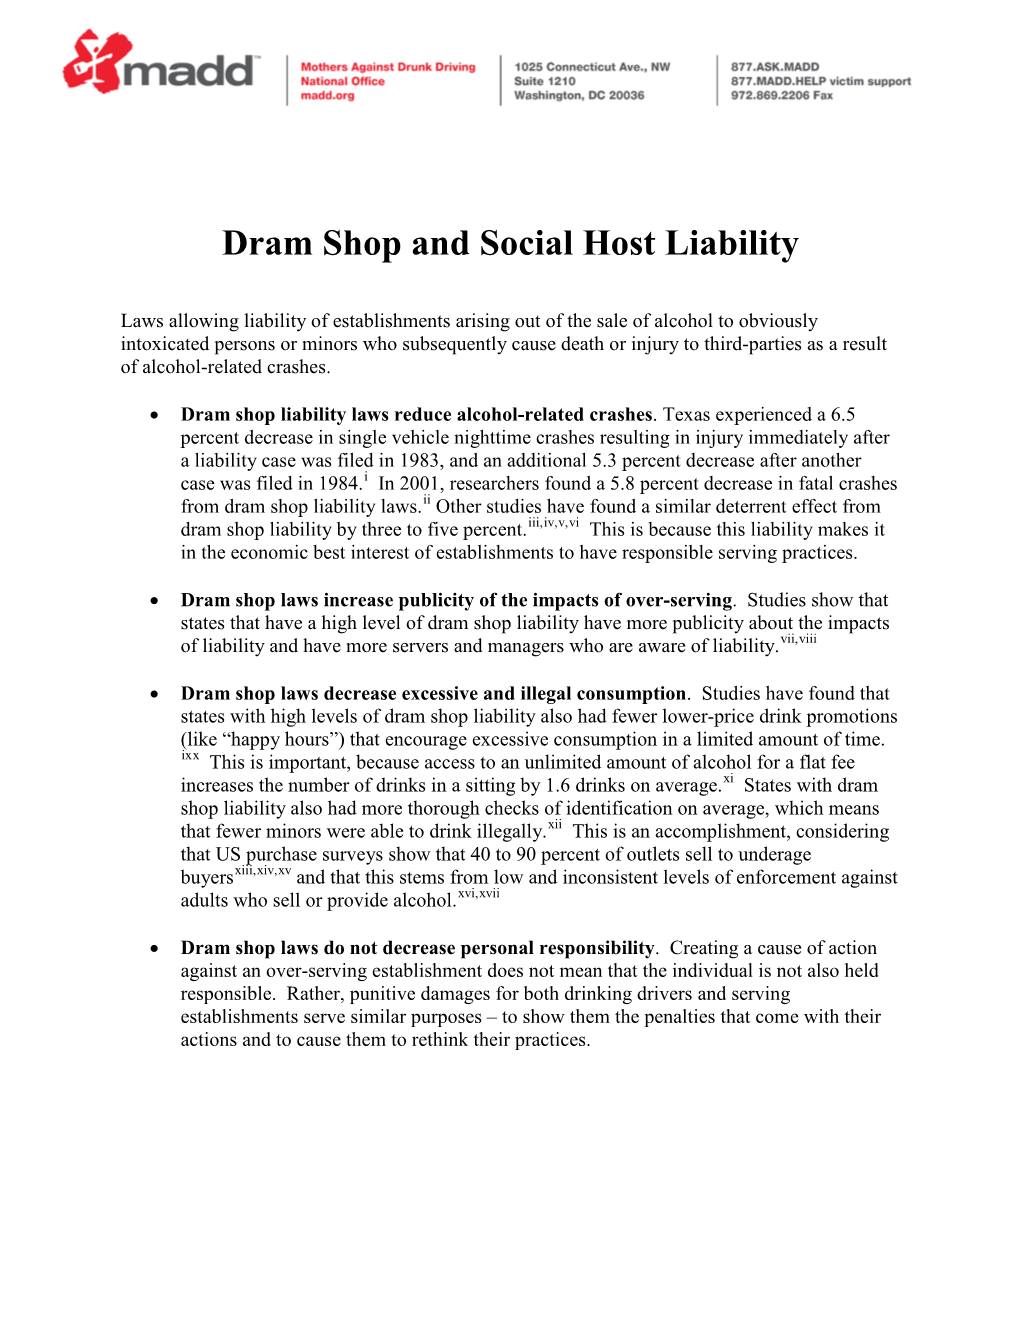 Dram Shop and Social Host Liability Laws